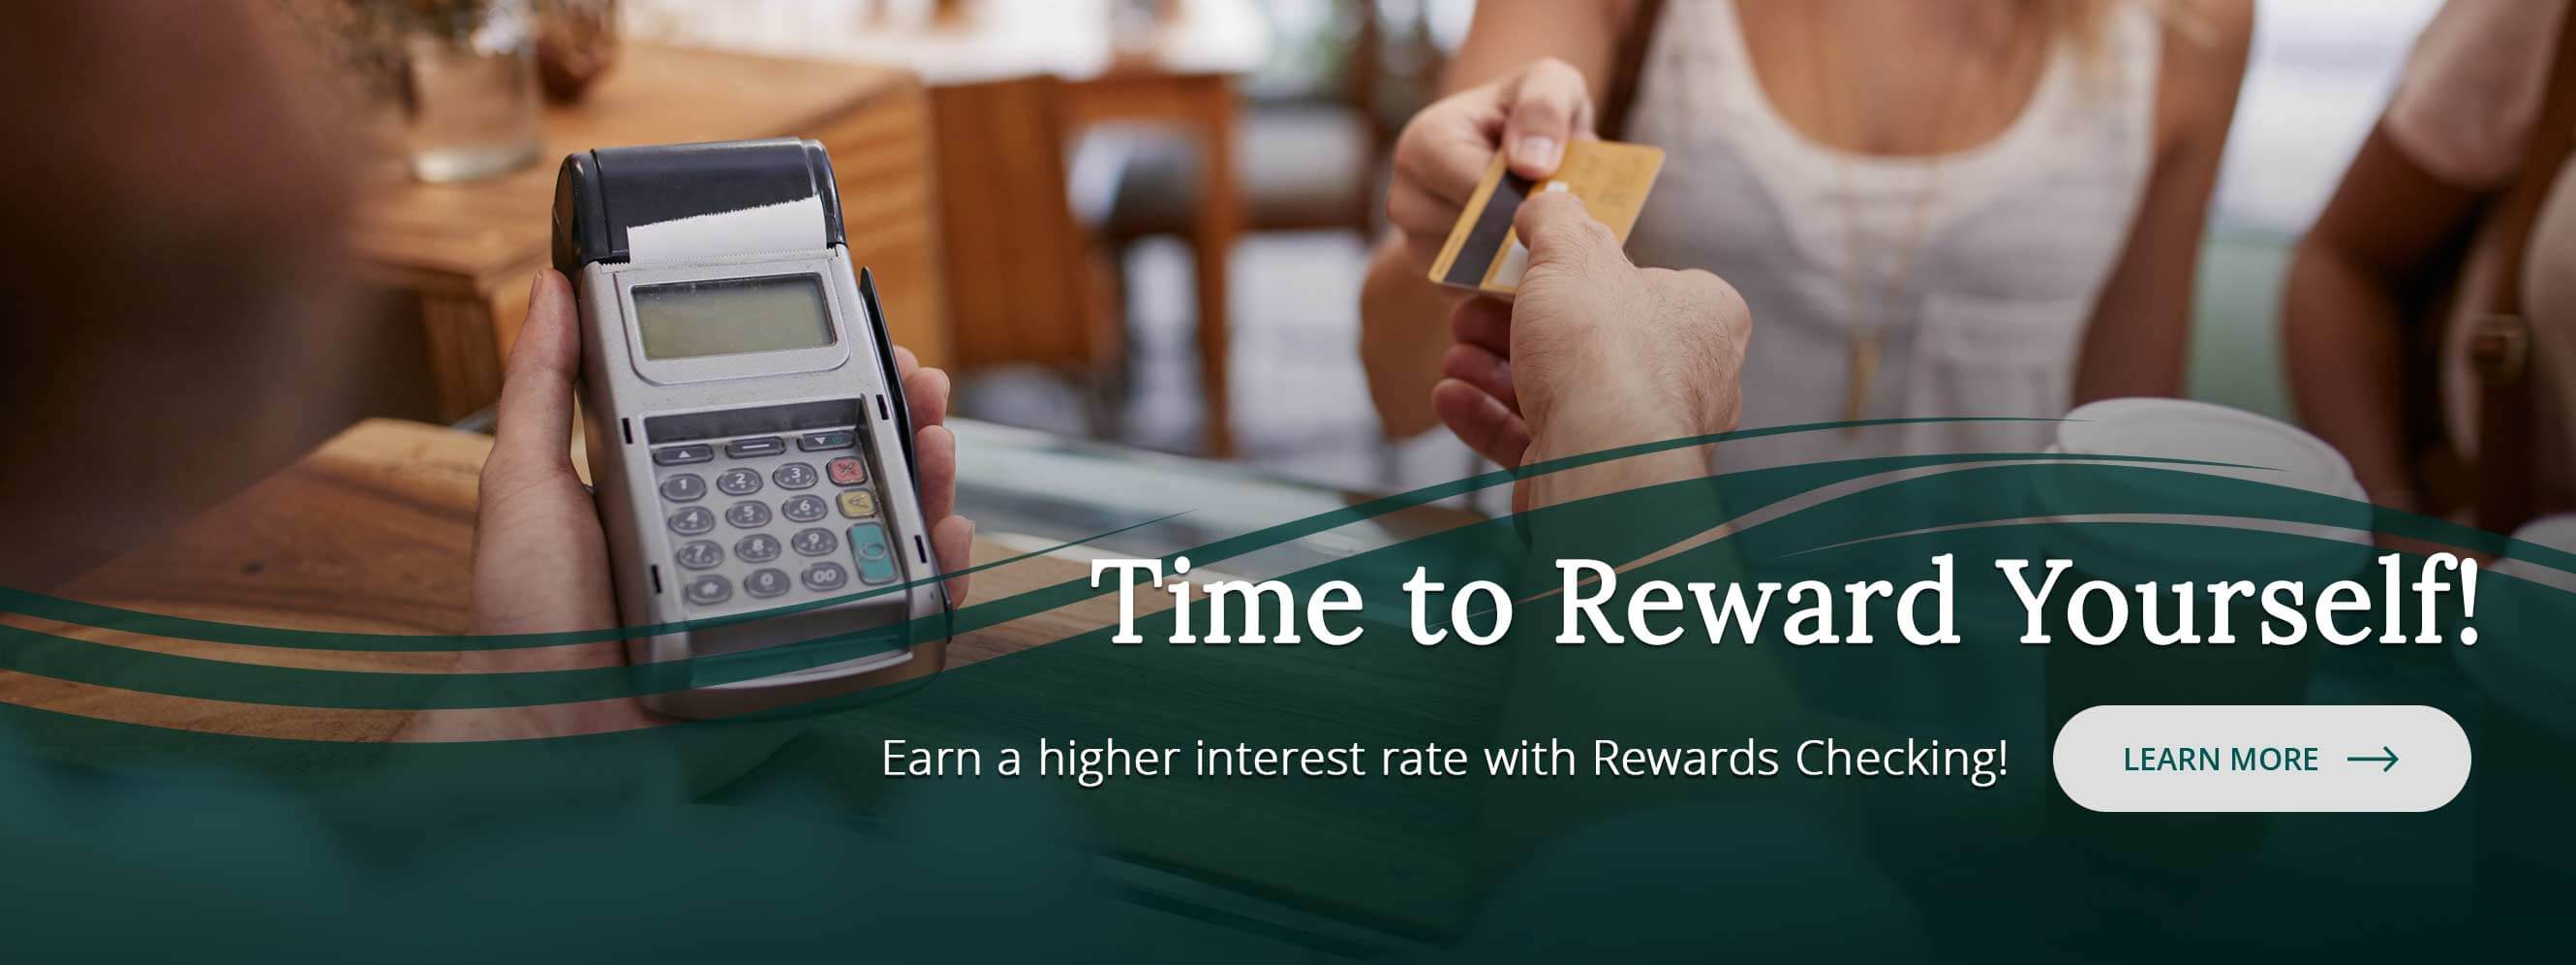 Time to Reward Yourself! Earn a higher interest rate with Rewards Checking! Learn More.